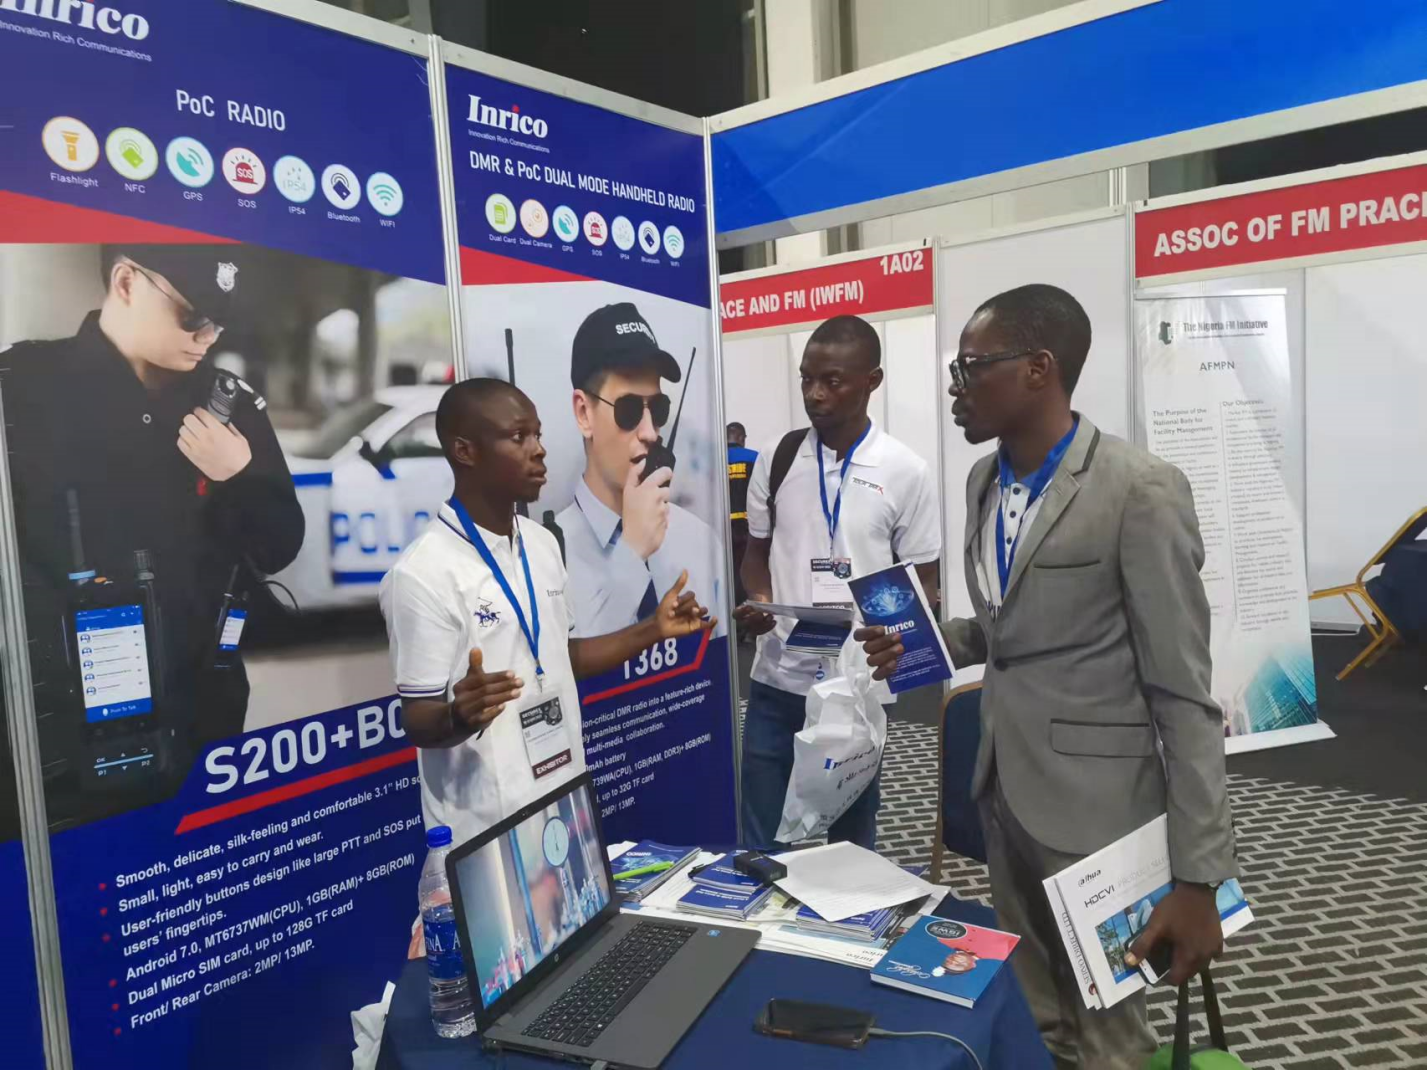 Inrico Attends Securex West Africa with PMR-LTE Convergent Communication Solutions